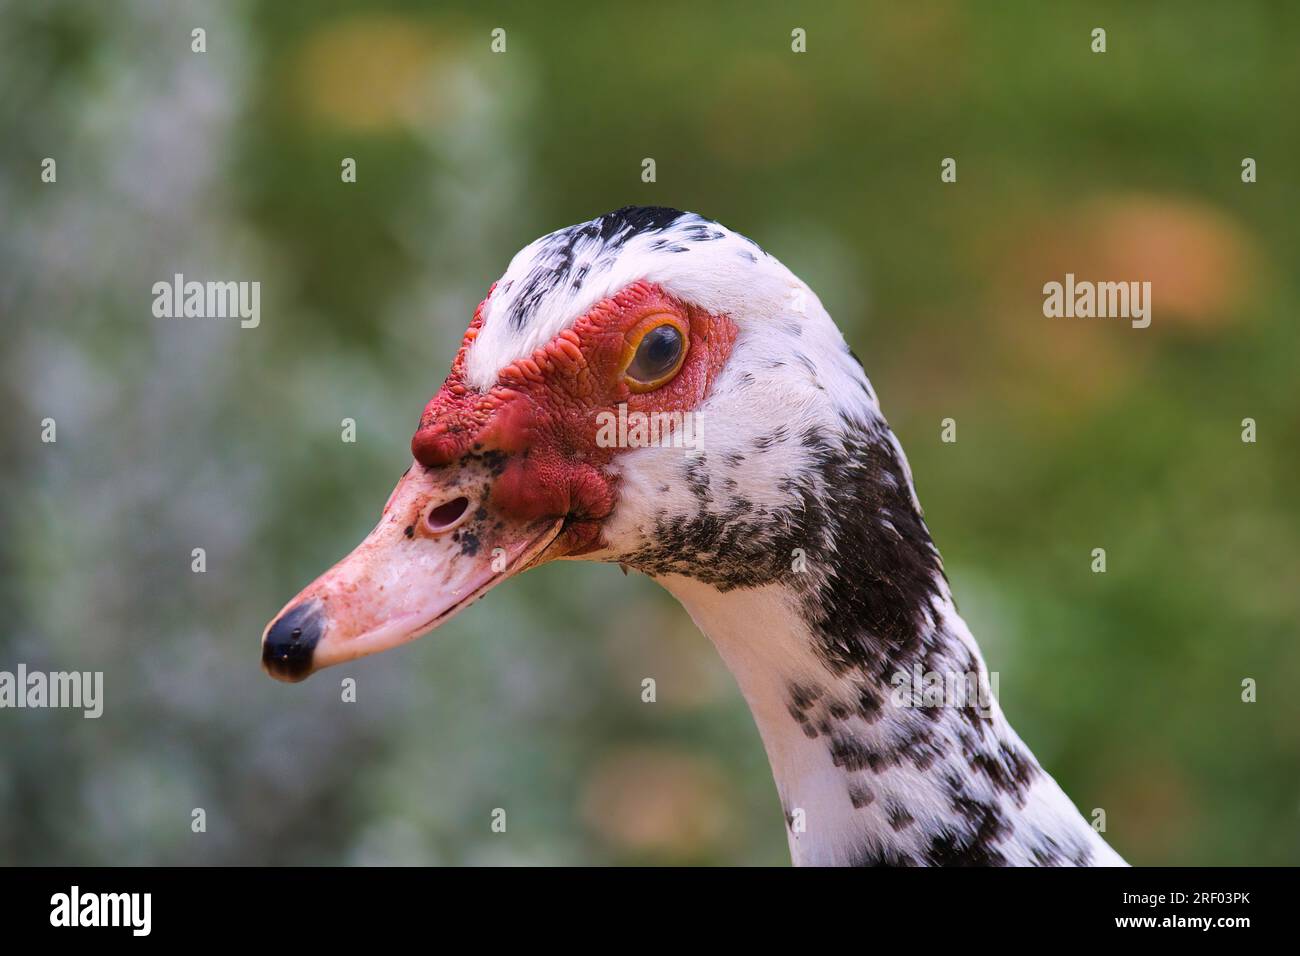 White, black, and red muscovy duck looking intently at the viewer. Stock Photo